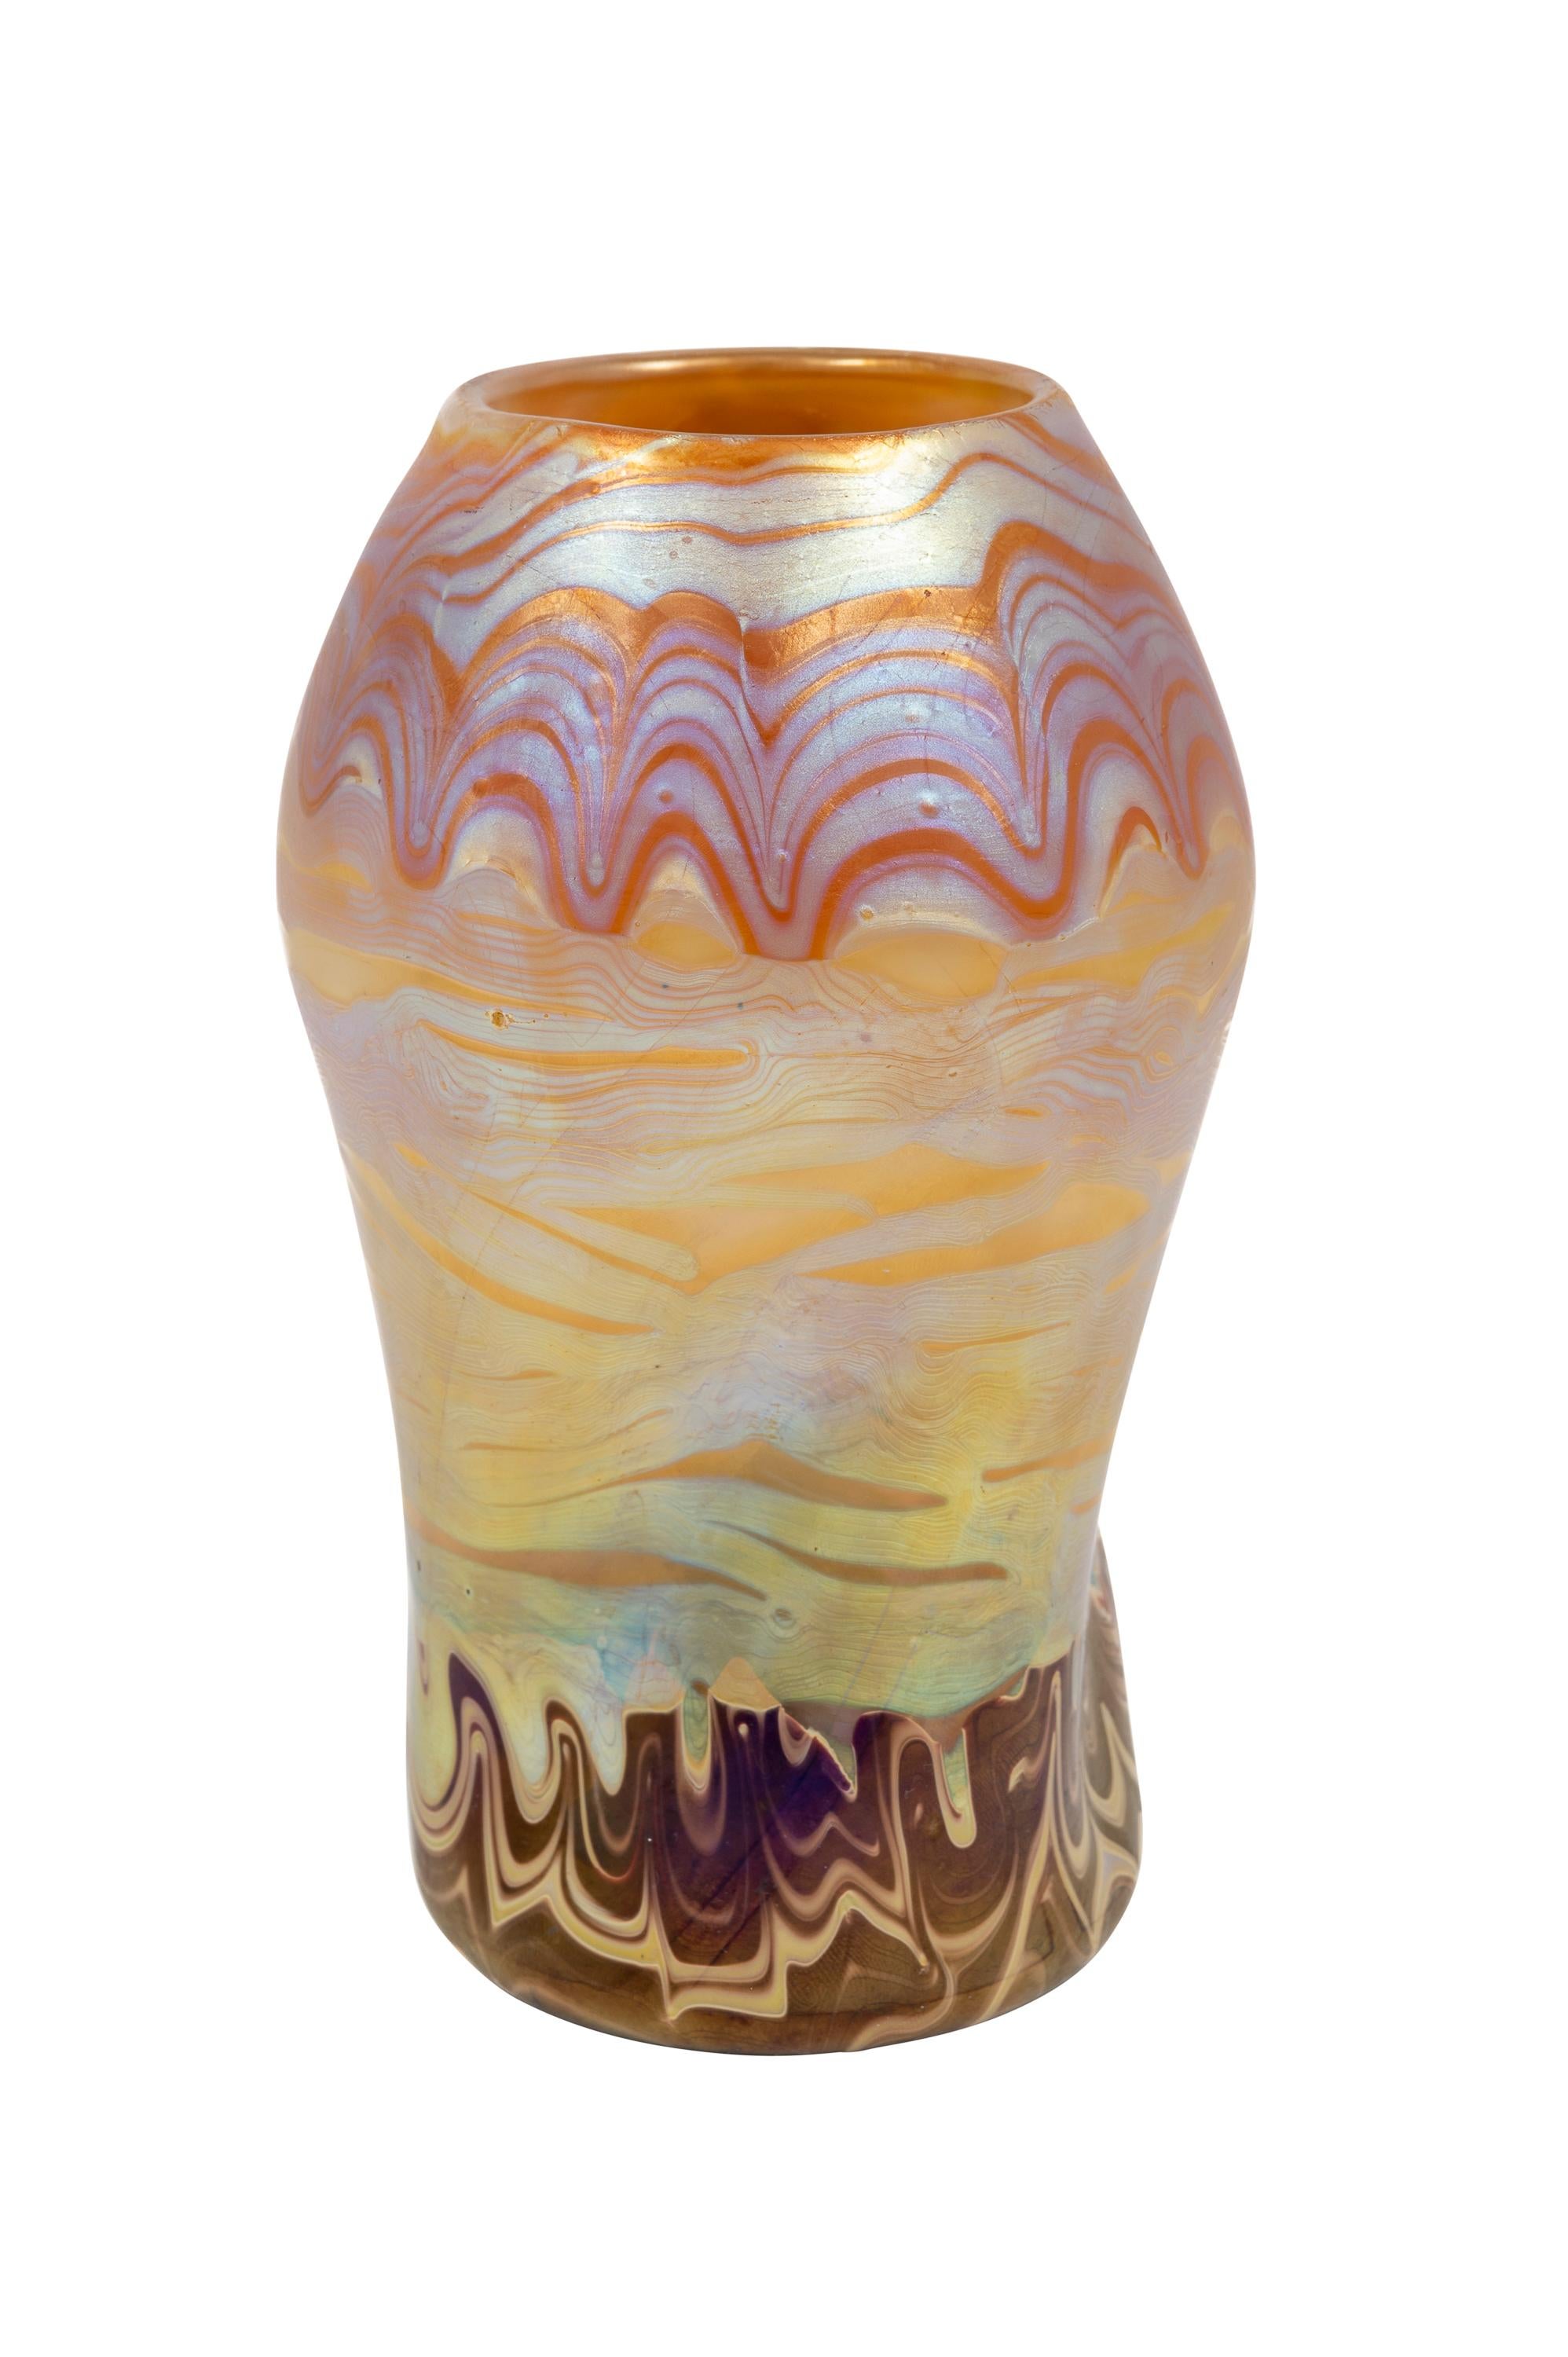 Austrian Jugendstil glass vase manufactured by Johann Loetz Witwe, Phenomen Genre 358 decoration, circa 1901

This glass vase is an extraordinary example of the Loetz manufactory its capability for design. The Phenomen Genre 358 decoration is known